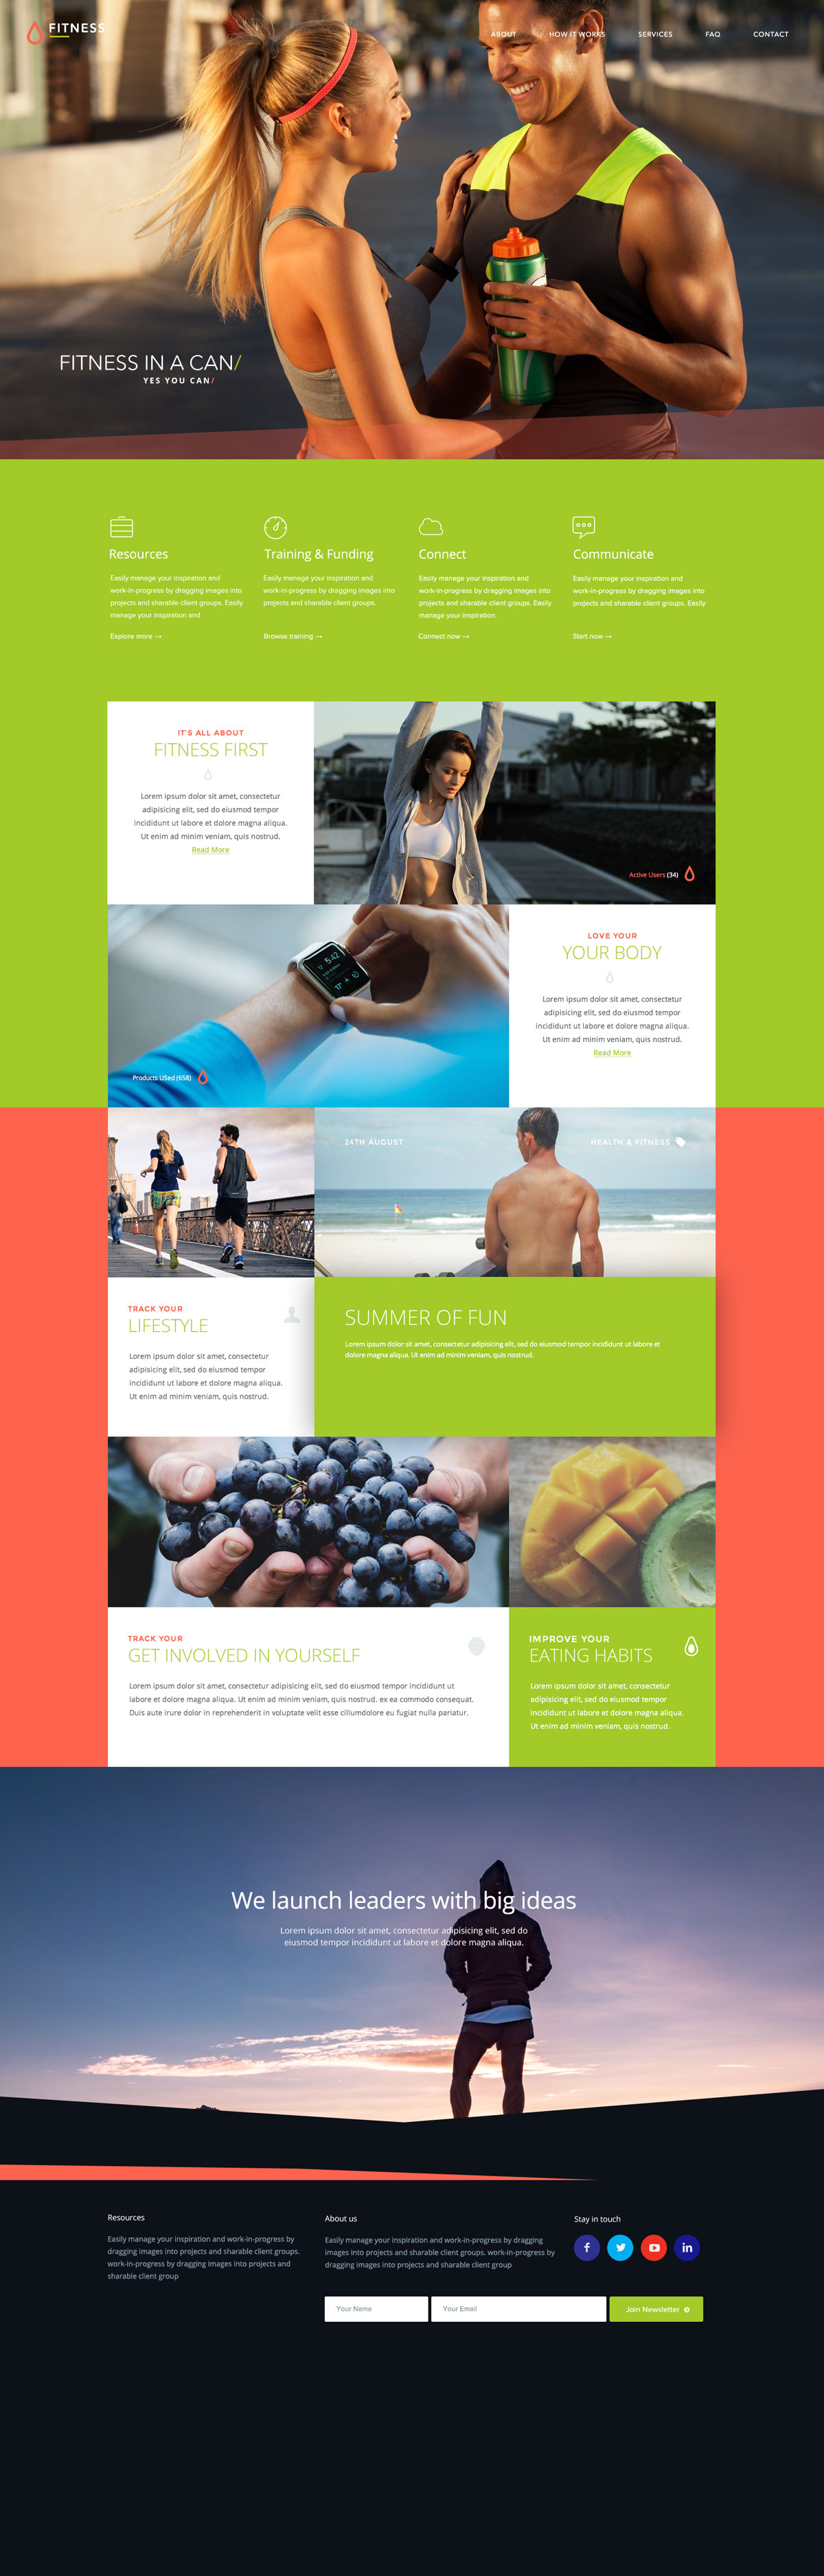 Fitness free Photoshop PSD template